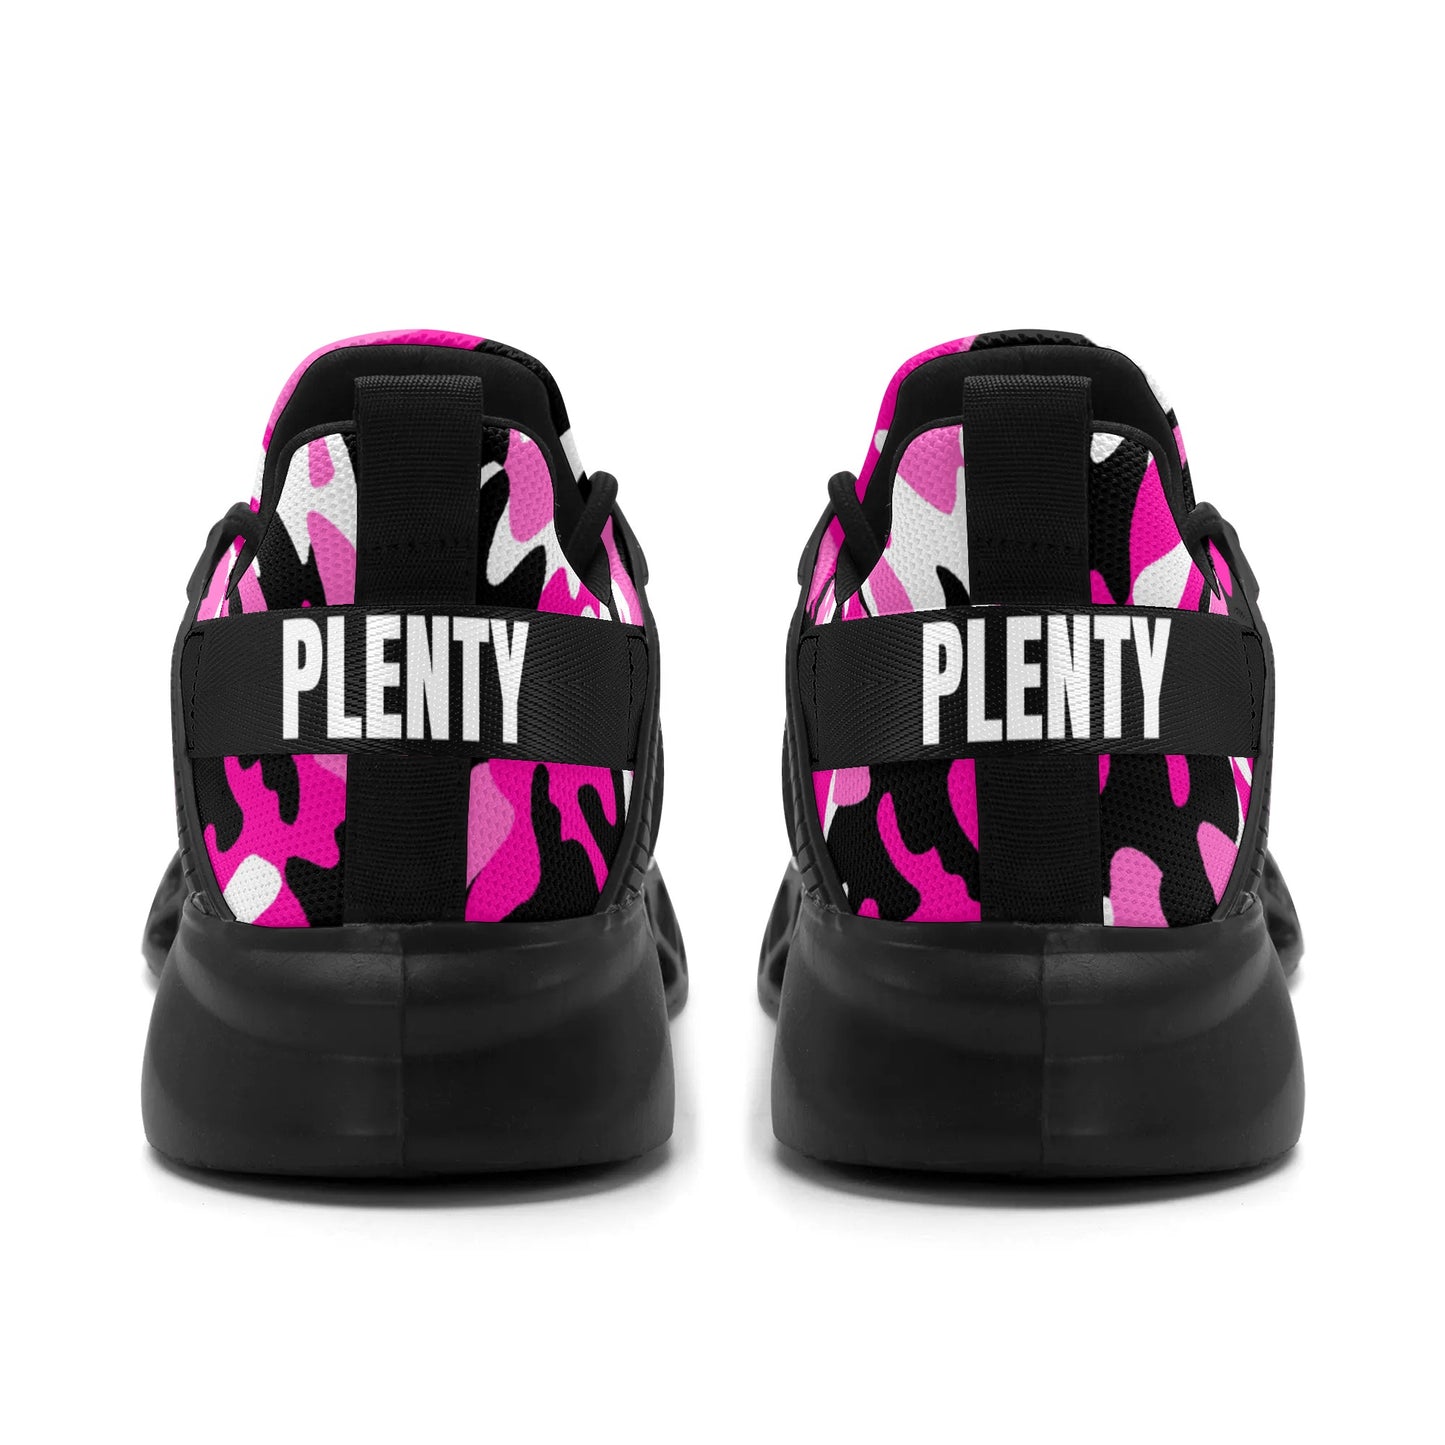 '24 WOMENS GREAT APE PAINTED CAMO RUNNERS | PINK BAE